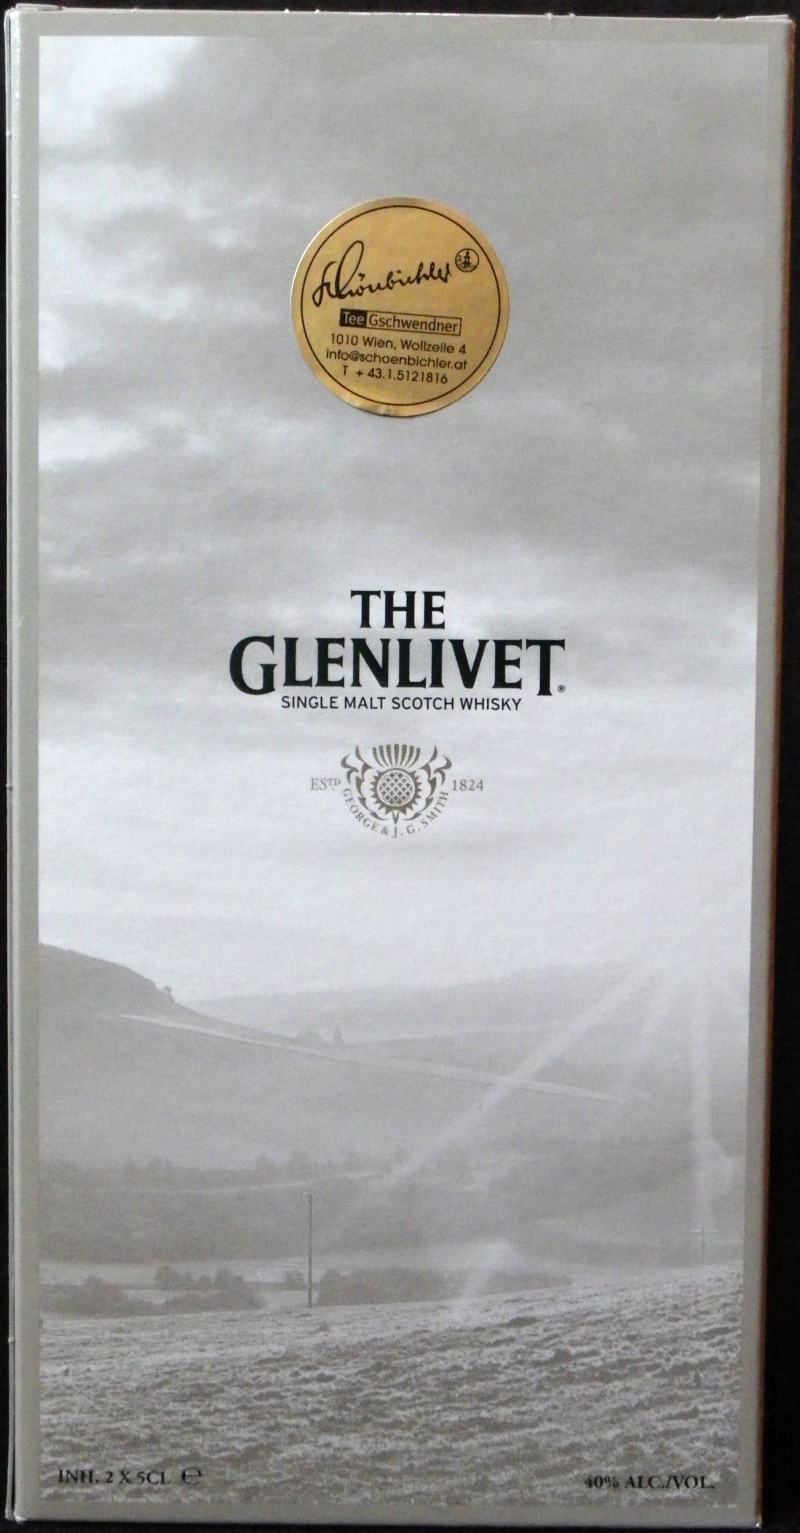 The Glenlivet
Estd. 1824
single malt scotch whisky
12 years of age
15 years of age